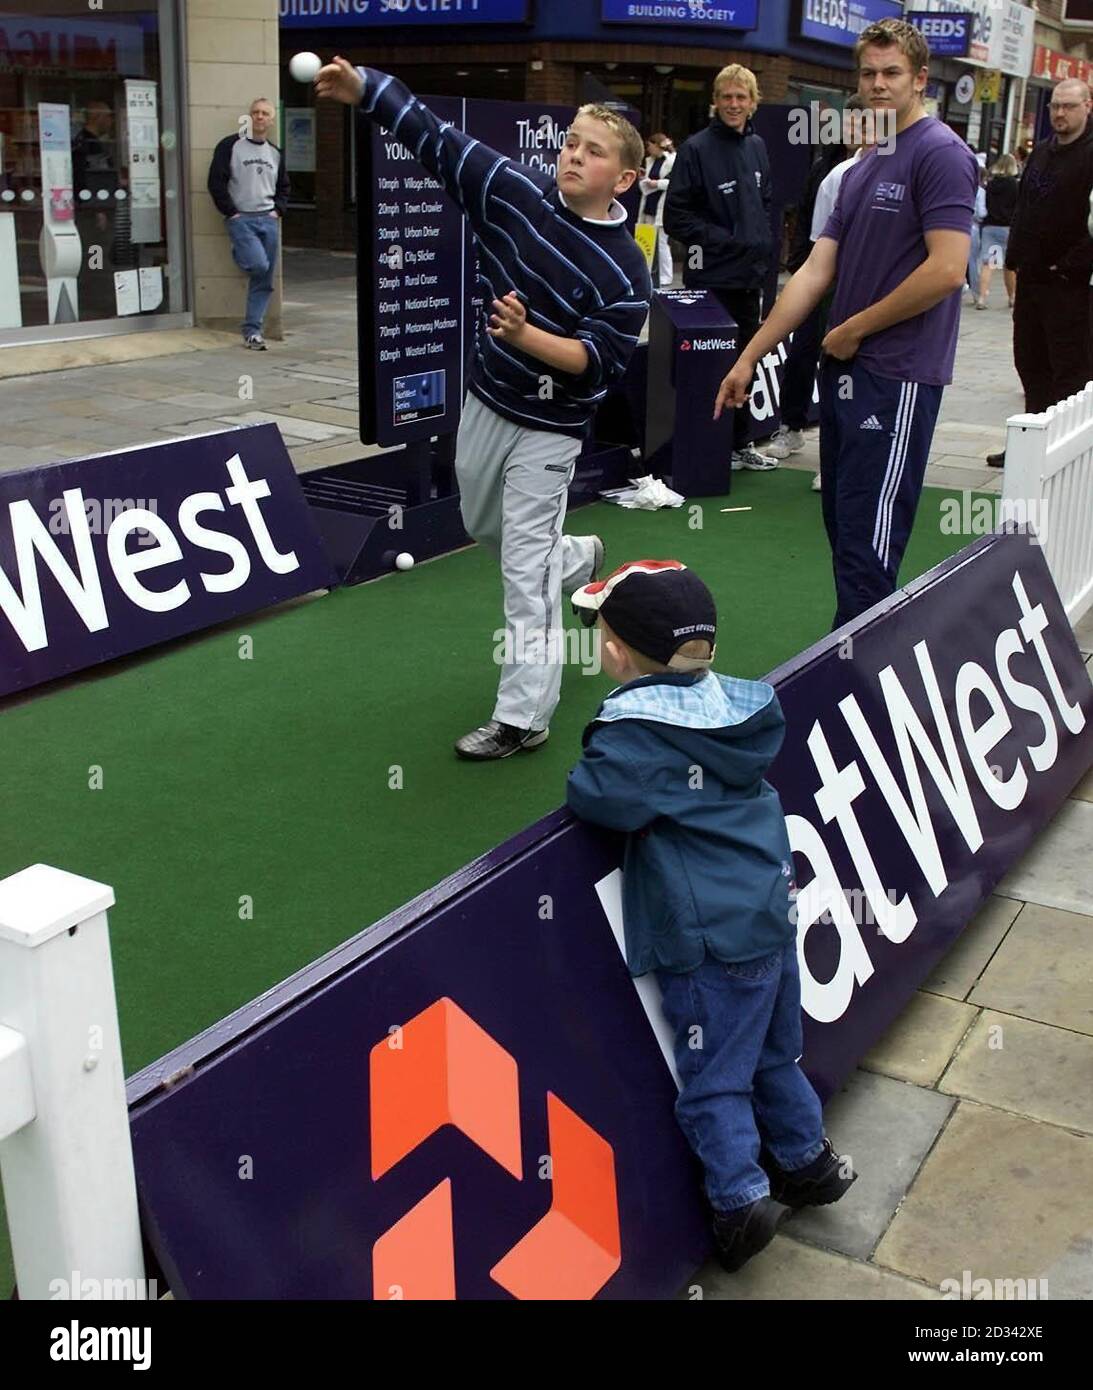 Oliver Blevins-Clarke watches as 12-year-old Ross Parker, from Wallsend, Newcastle, take part in the NatWest Speed Challenge during the NatWest Interactive Roadshow in Newcastle.   *  Two-year-old Oliver, from  Jarrow, was there to see youngsters take part in the NatWest Speed Challenge in the city's Haymarket. Stock Photo